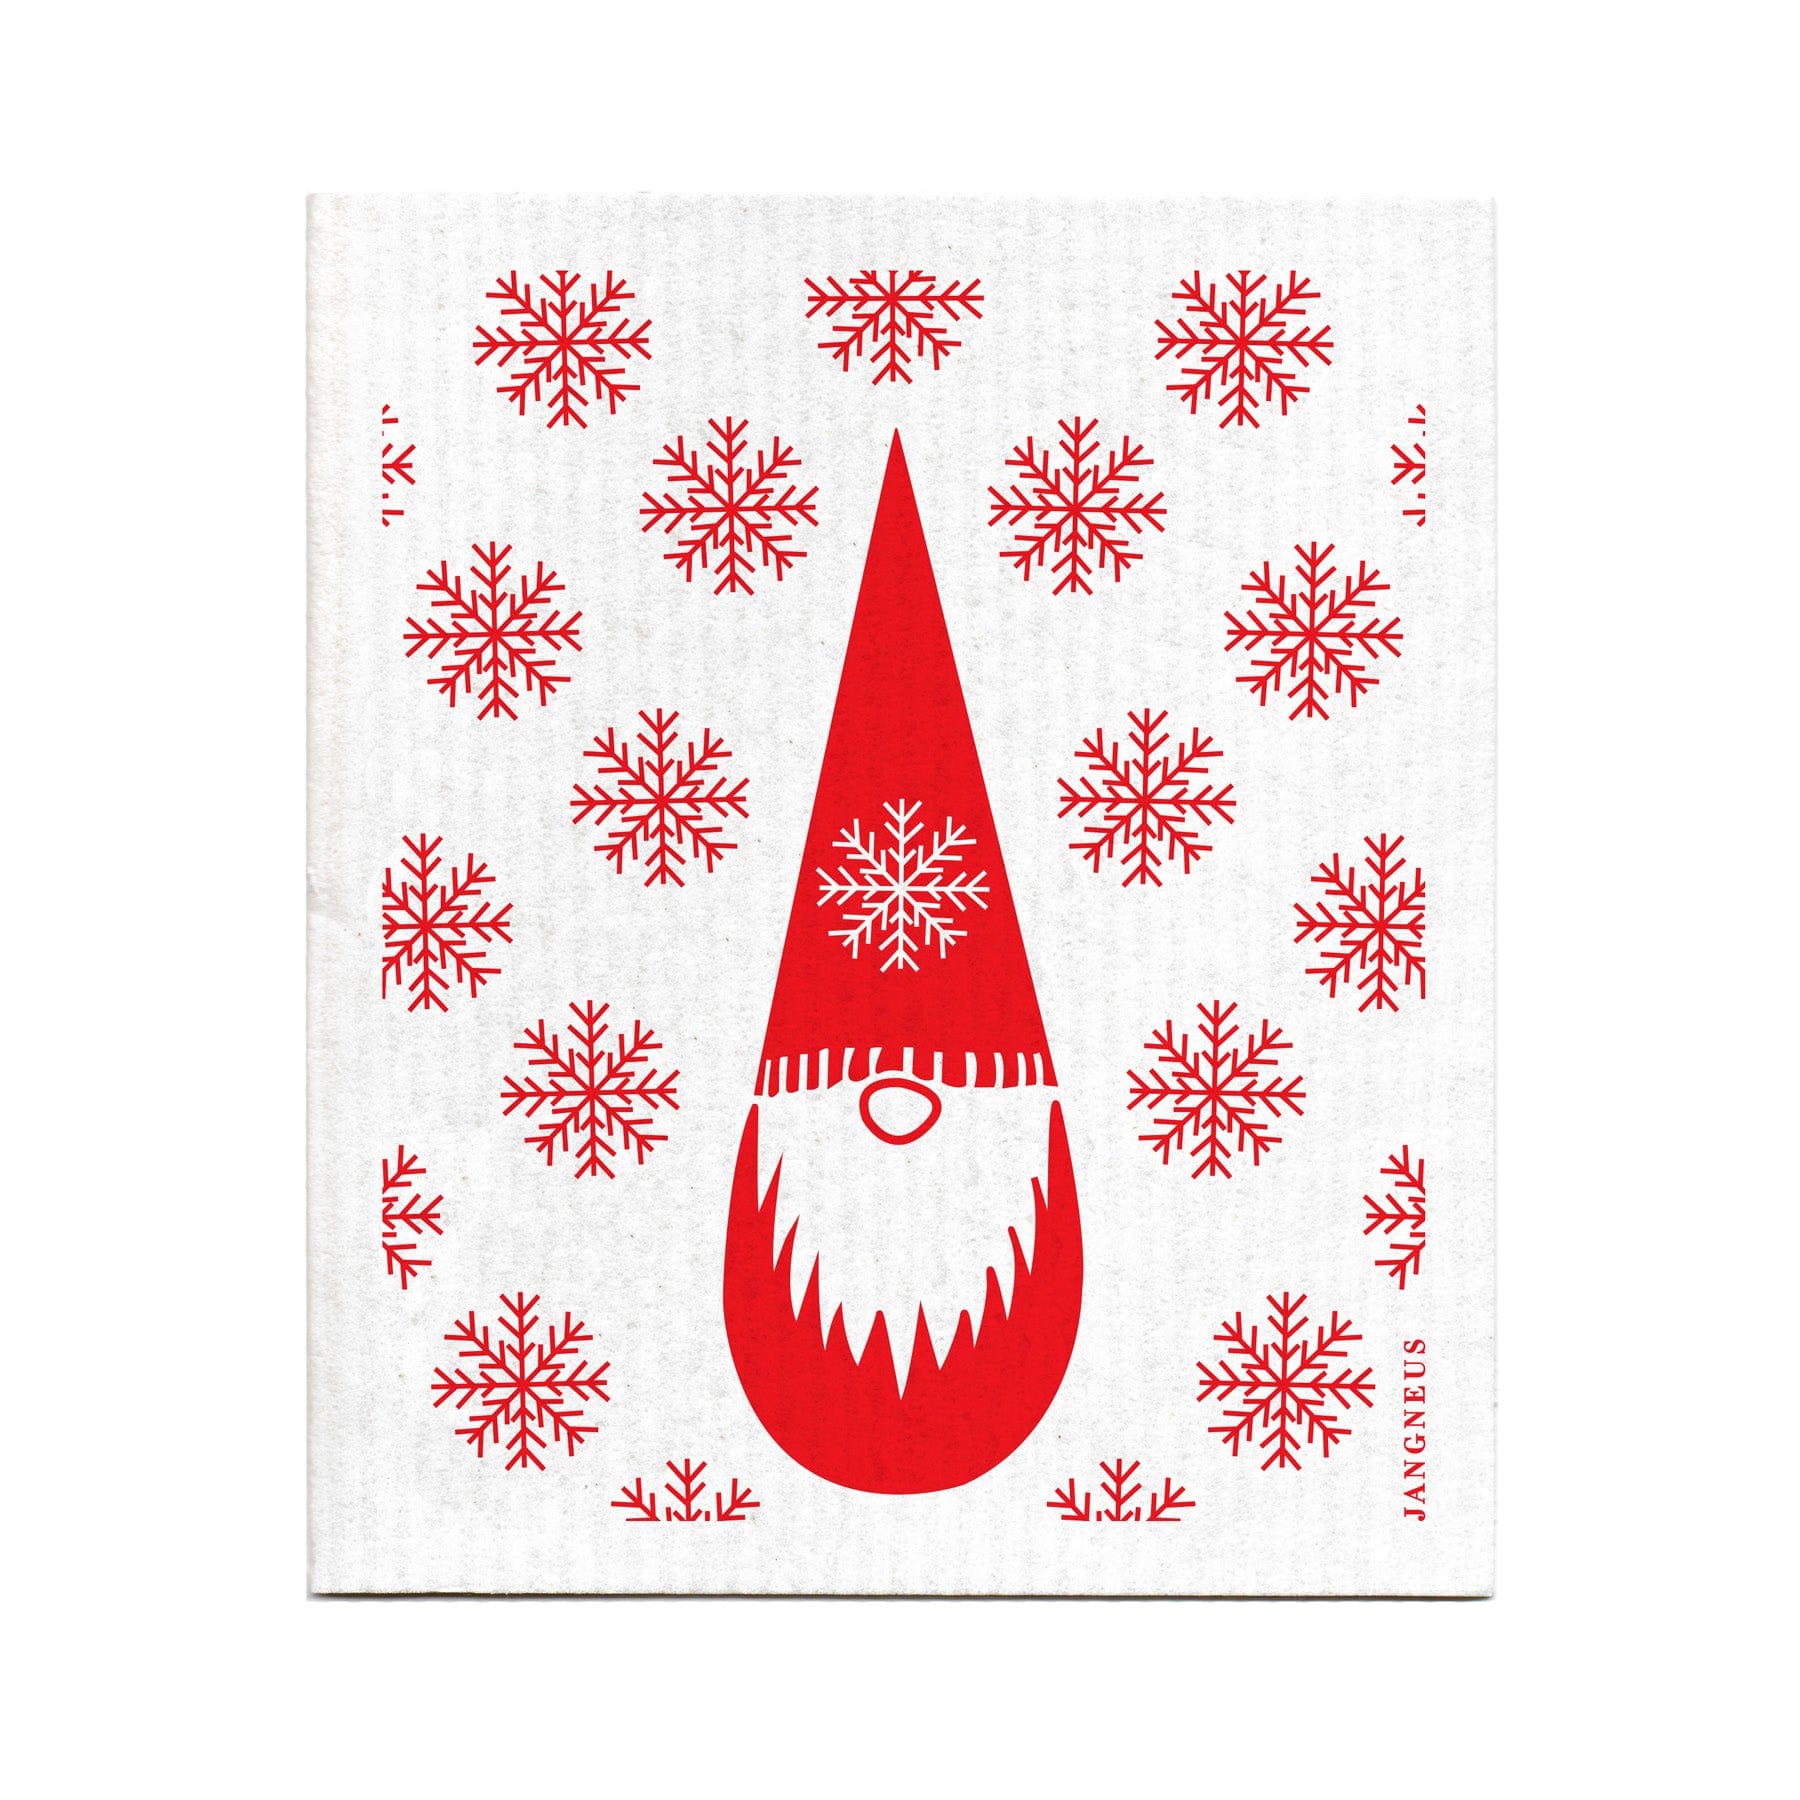 Biodegradable dishcloth - red tomte